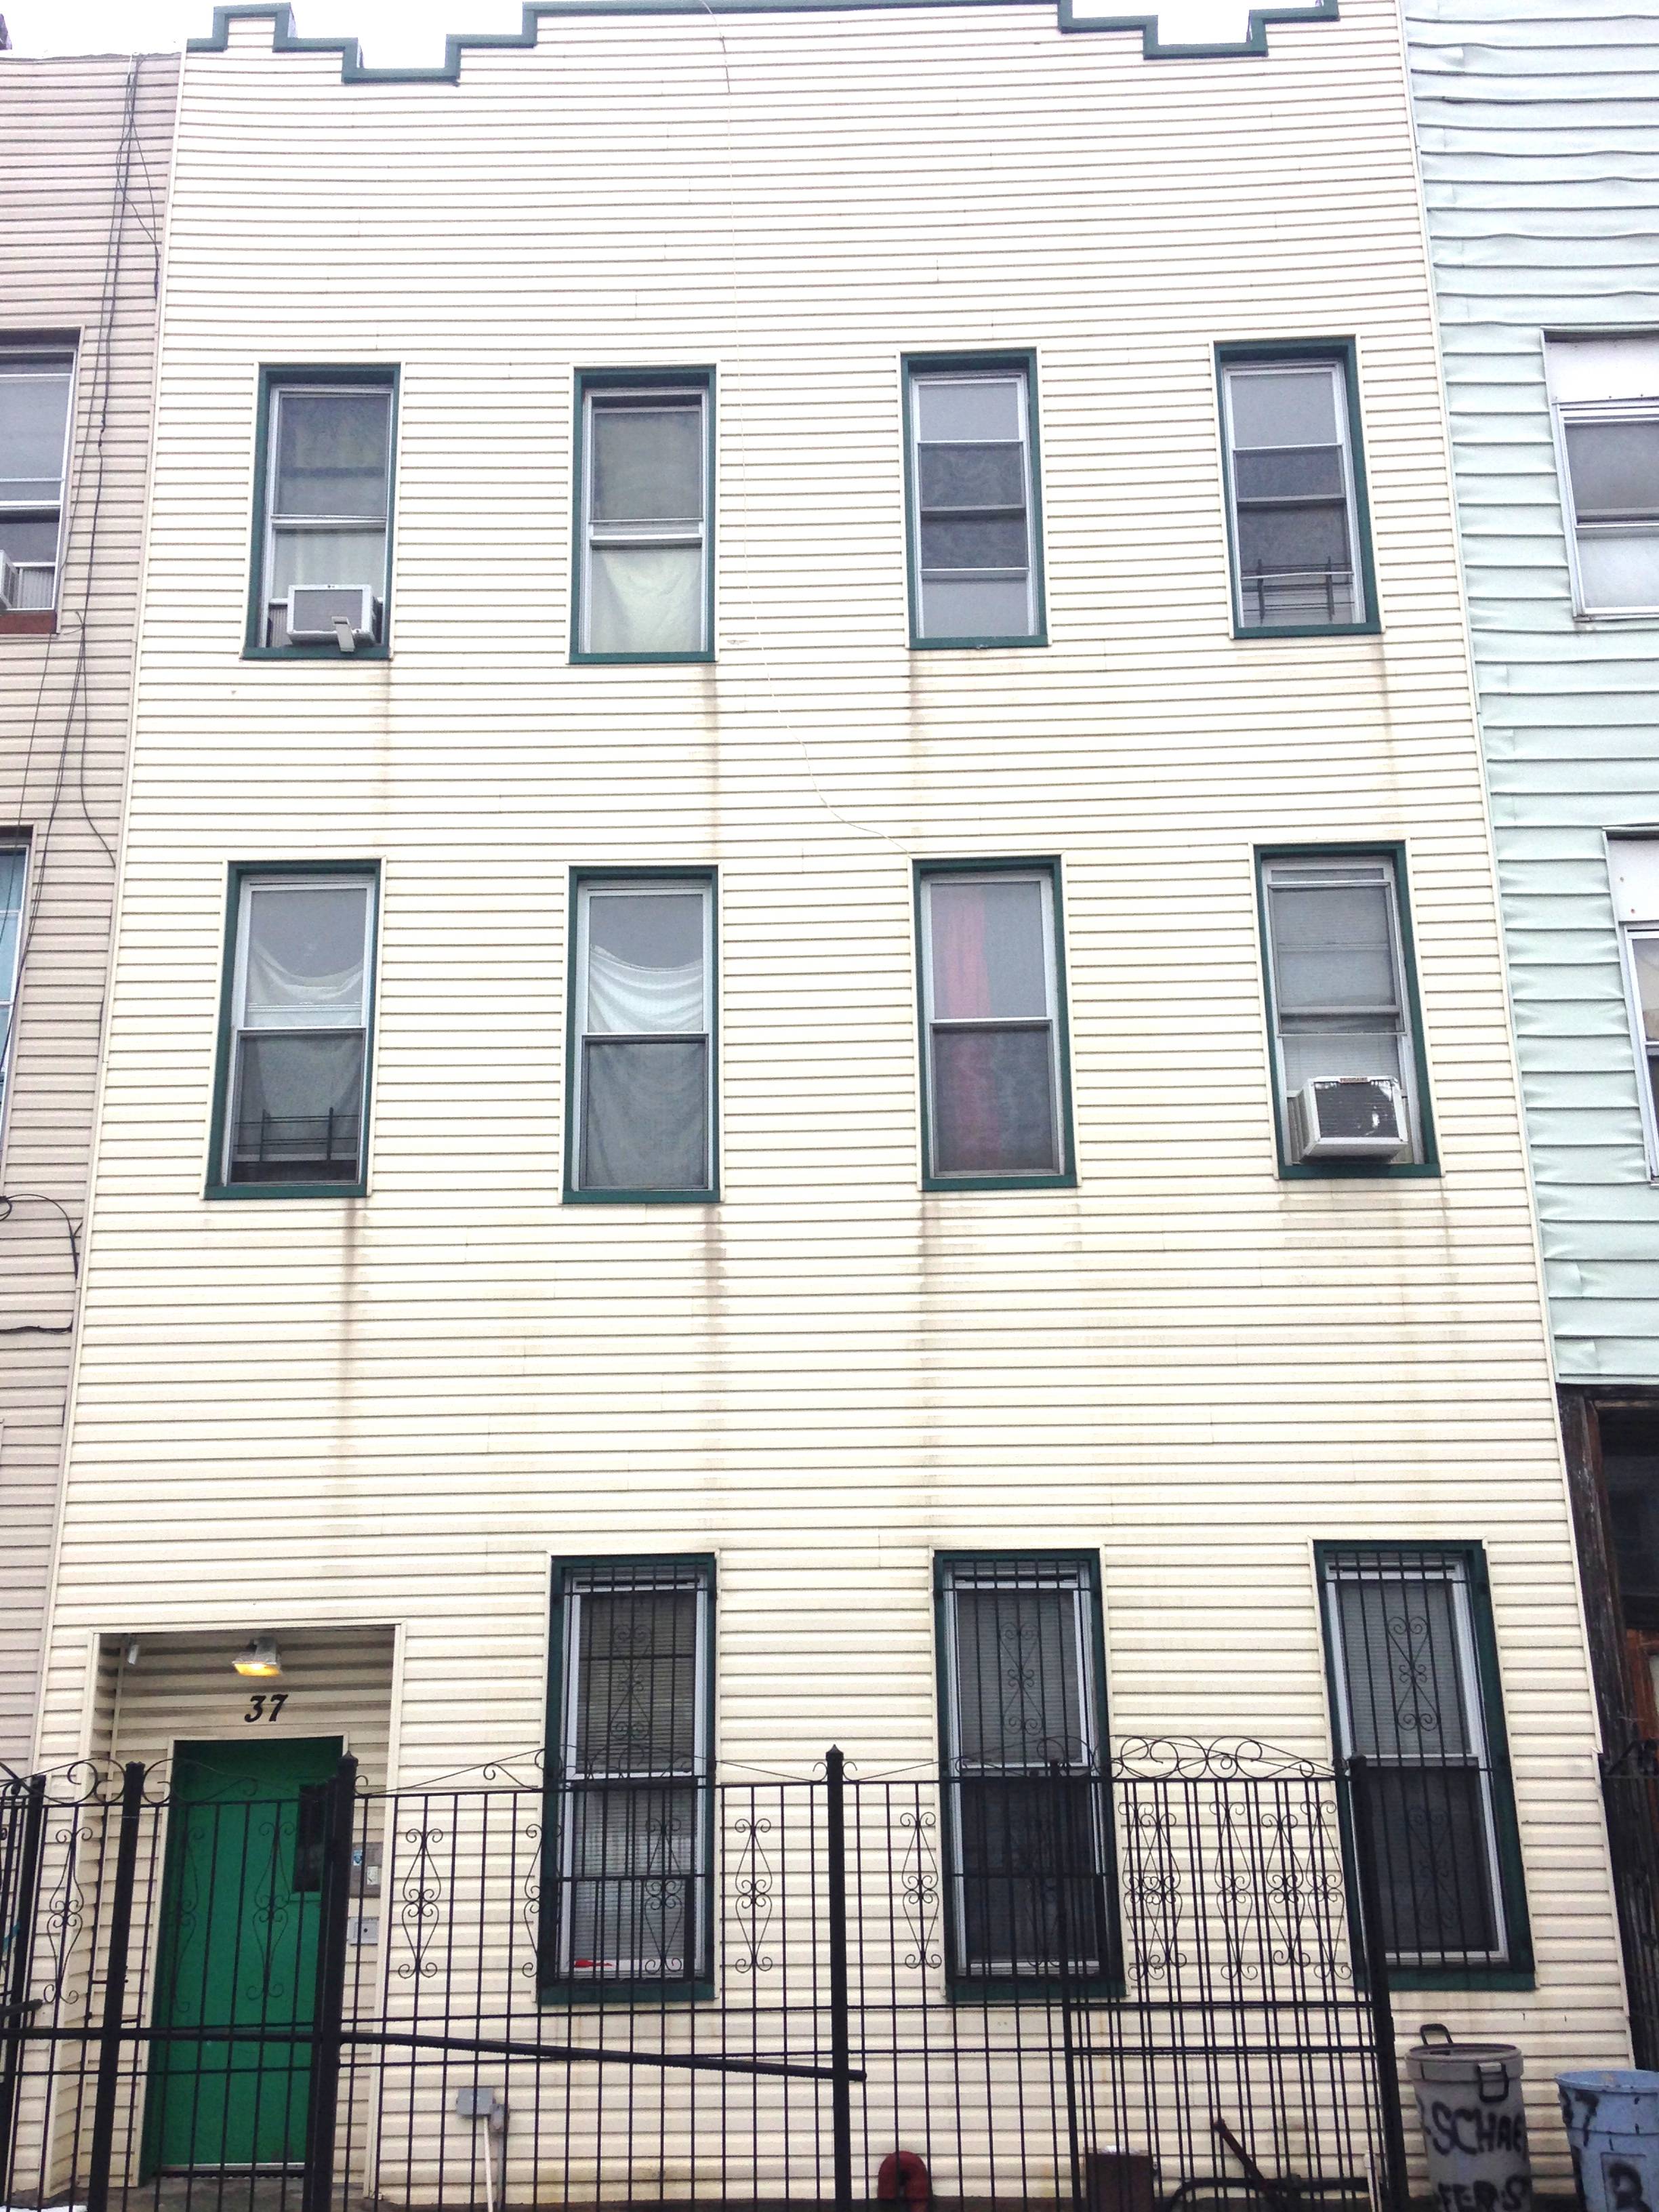 37 Schaefer Street, Brooklyn NY 11207: Income Producing Property- ALL FREE MARKETS RENT THAT COULD BE INCREASED. CURRENT CAP RATE 3.5%